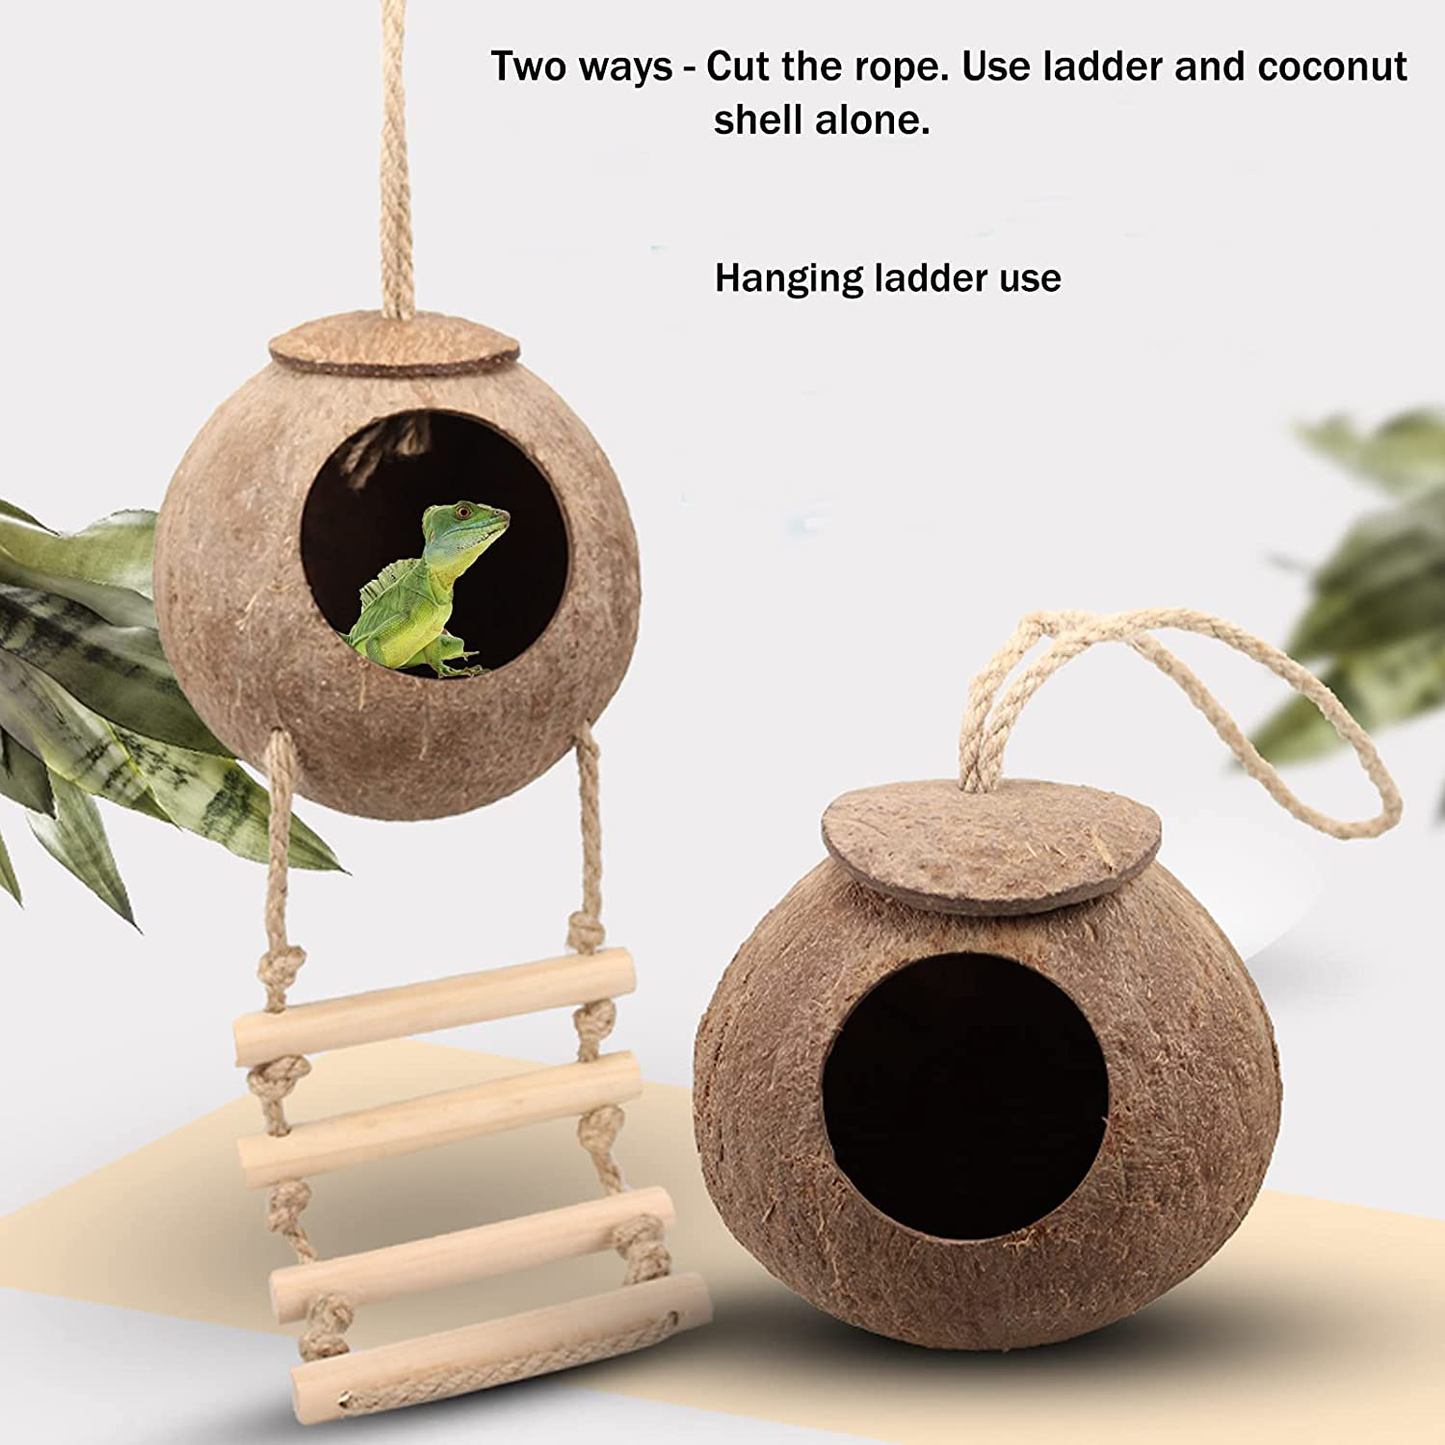 HERCOCCI Leopard Gecko Tank Accessories, Coconut Shell Ladder Hideout Hole Reptile Climbing Vine Habitat Decor with 3 Pieces Colorful Plastic Plants for Chameleon Lizard Snake Hermit Crab Animals & Pet Supplies > Pet Supplies > Reptile & Amphibian Supplies > Reptile & Amphibian Habitat Accessories HERCOCCI   